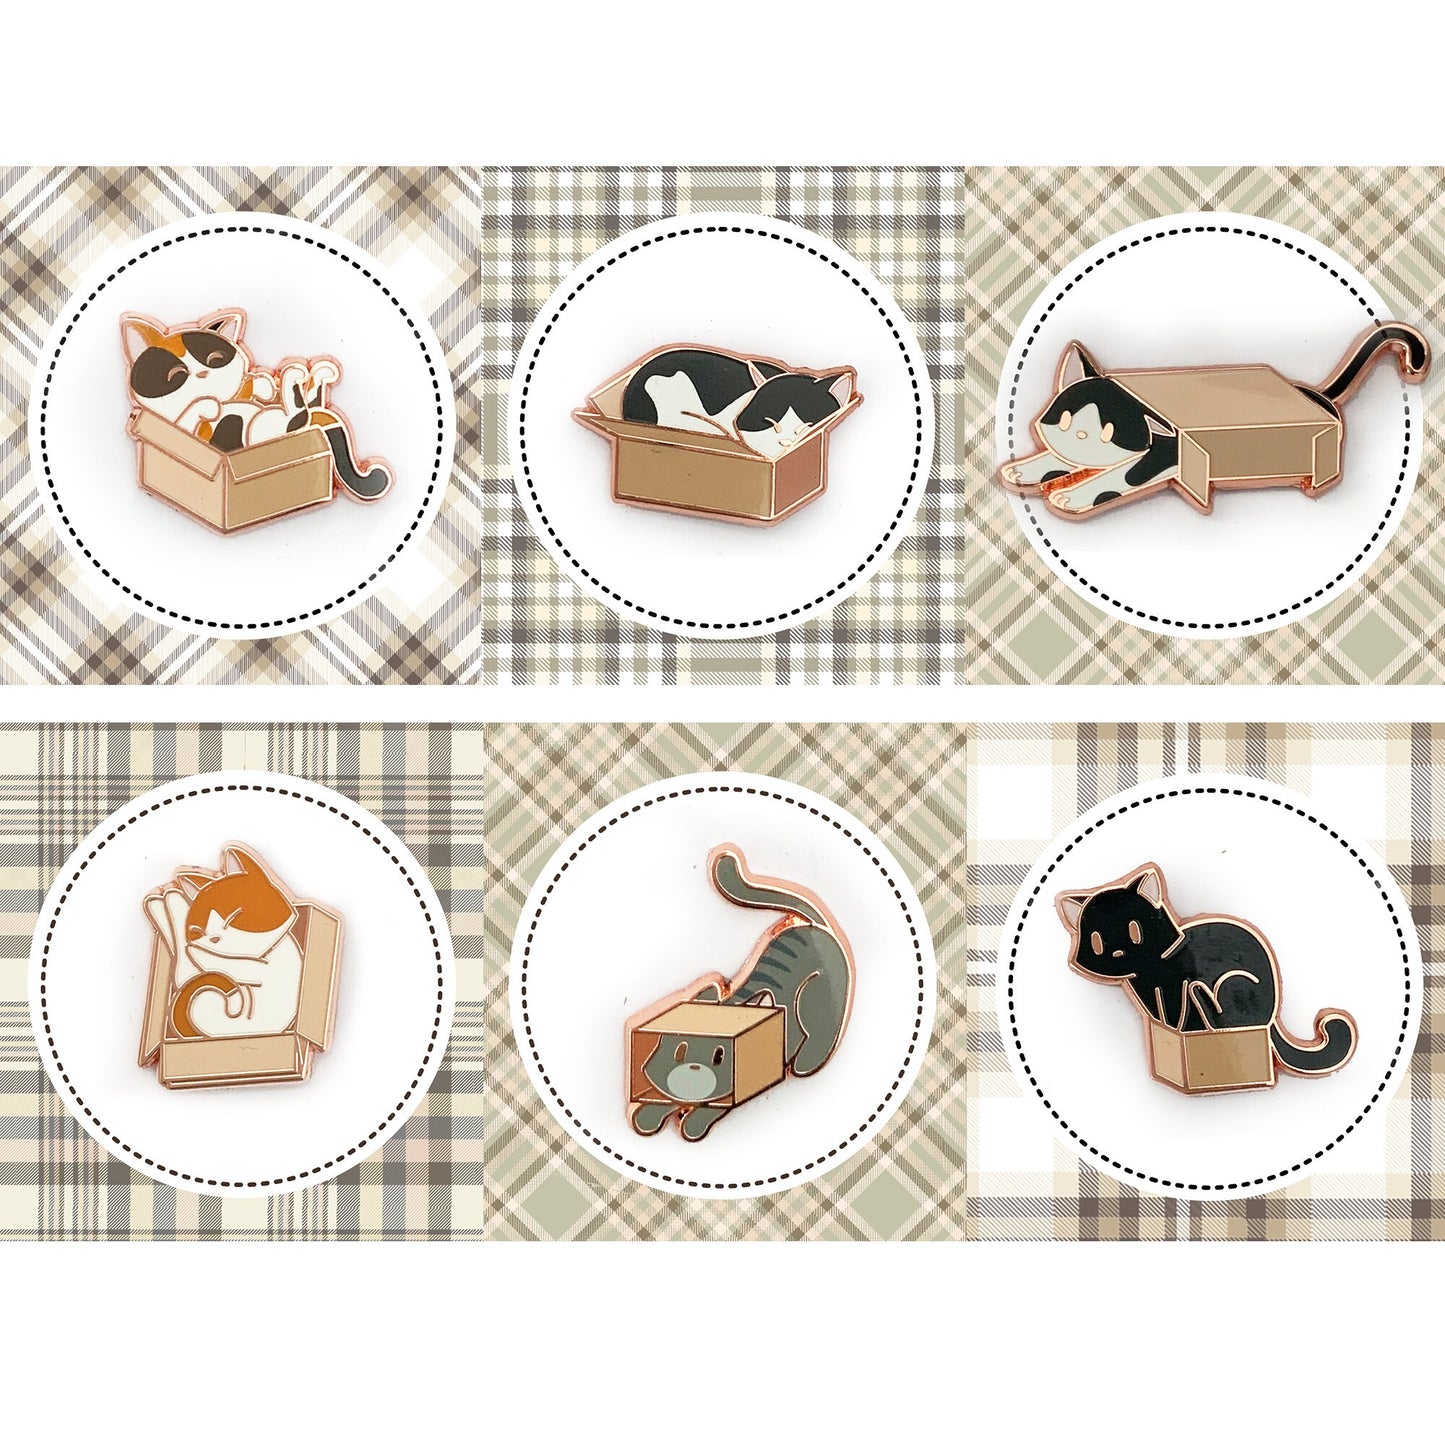 Kitty-in-a-Box Mini Collection *EXCLUSIVE*, Set of 6 Enamel Pins